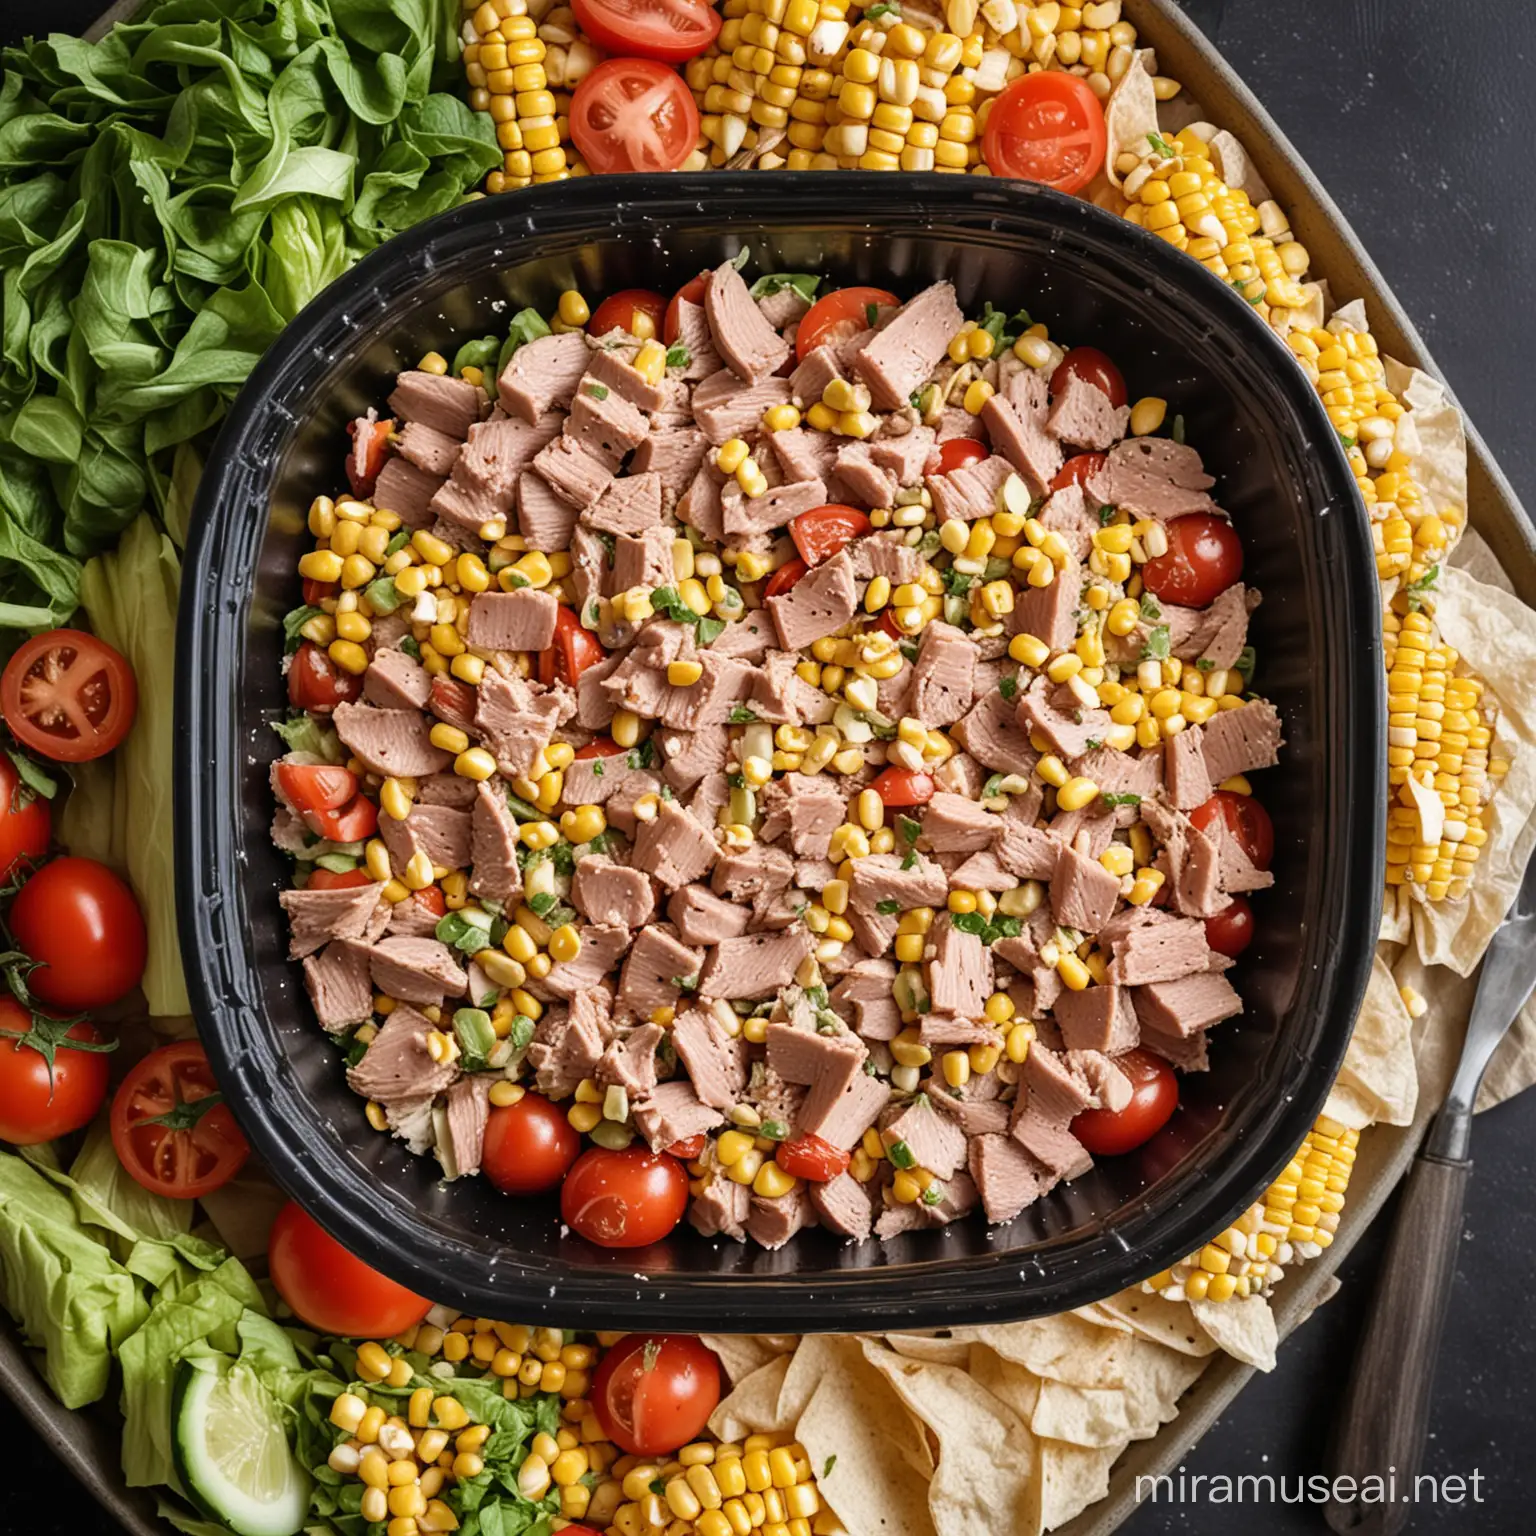 Overhead View of Tuna Salad with Tomatoes and Corn in Round Container